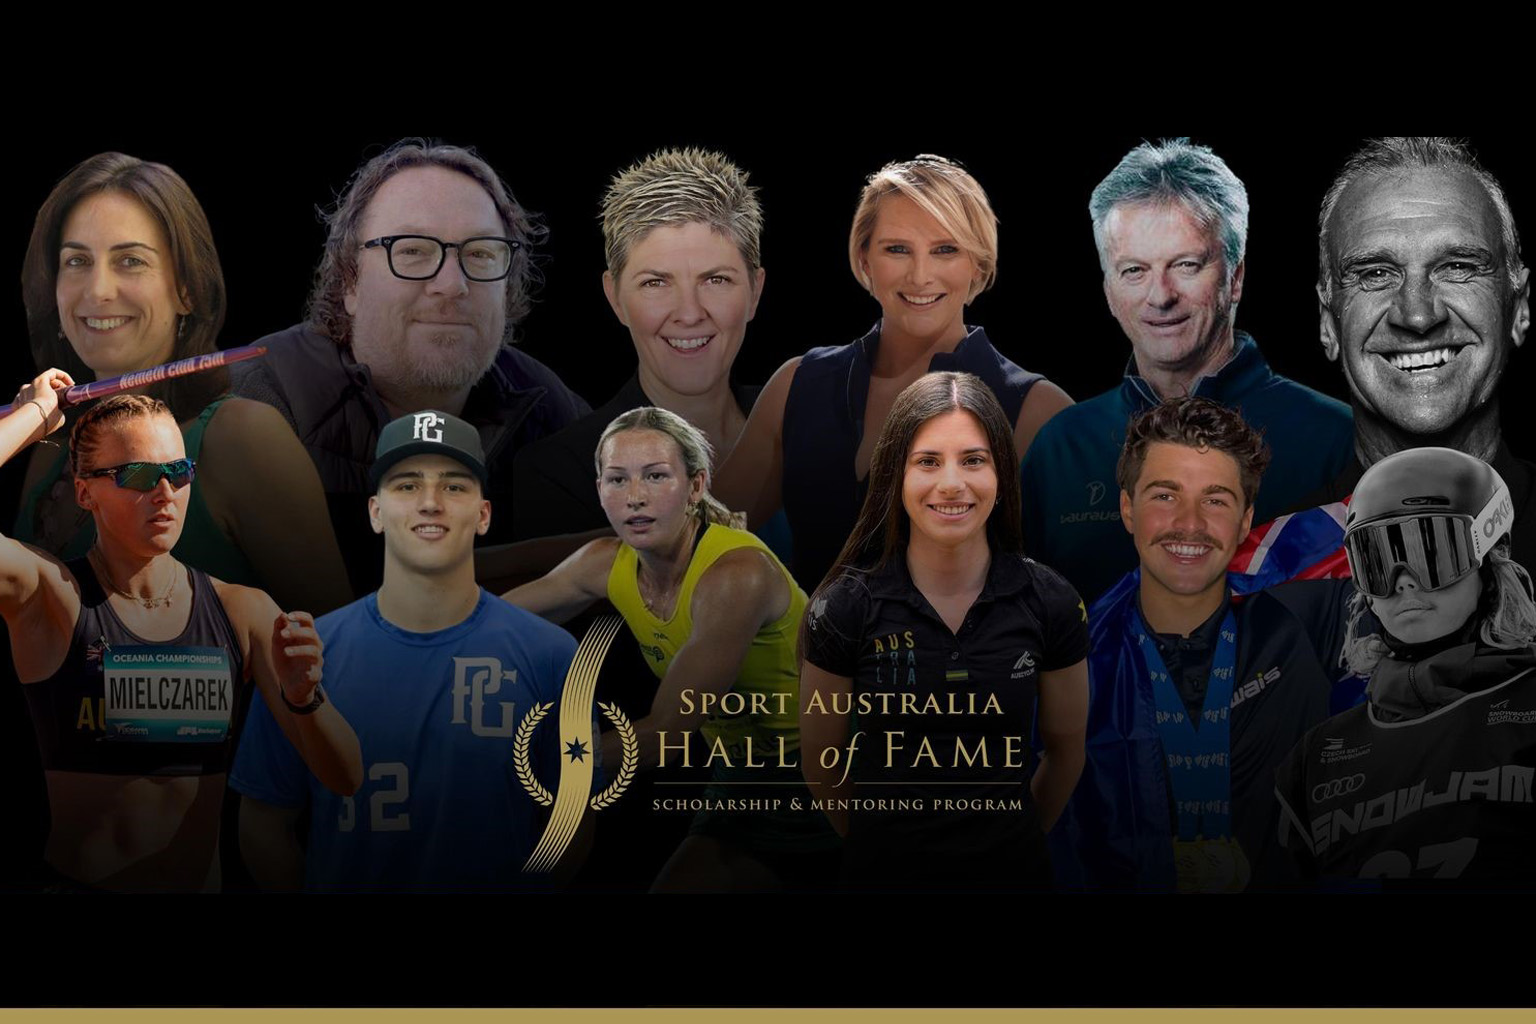 Compilation of mentor and athlete headshots with the Sport Australia Hall of Fame logo